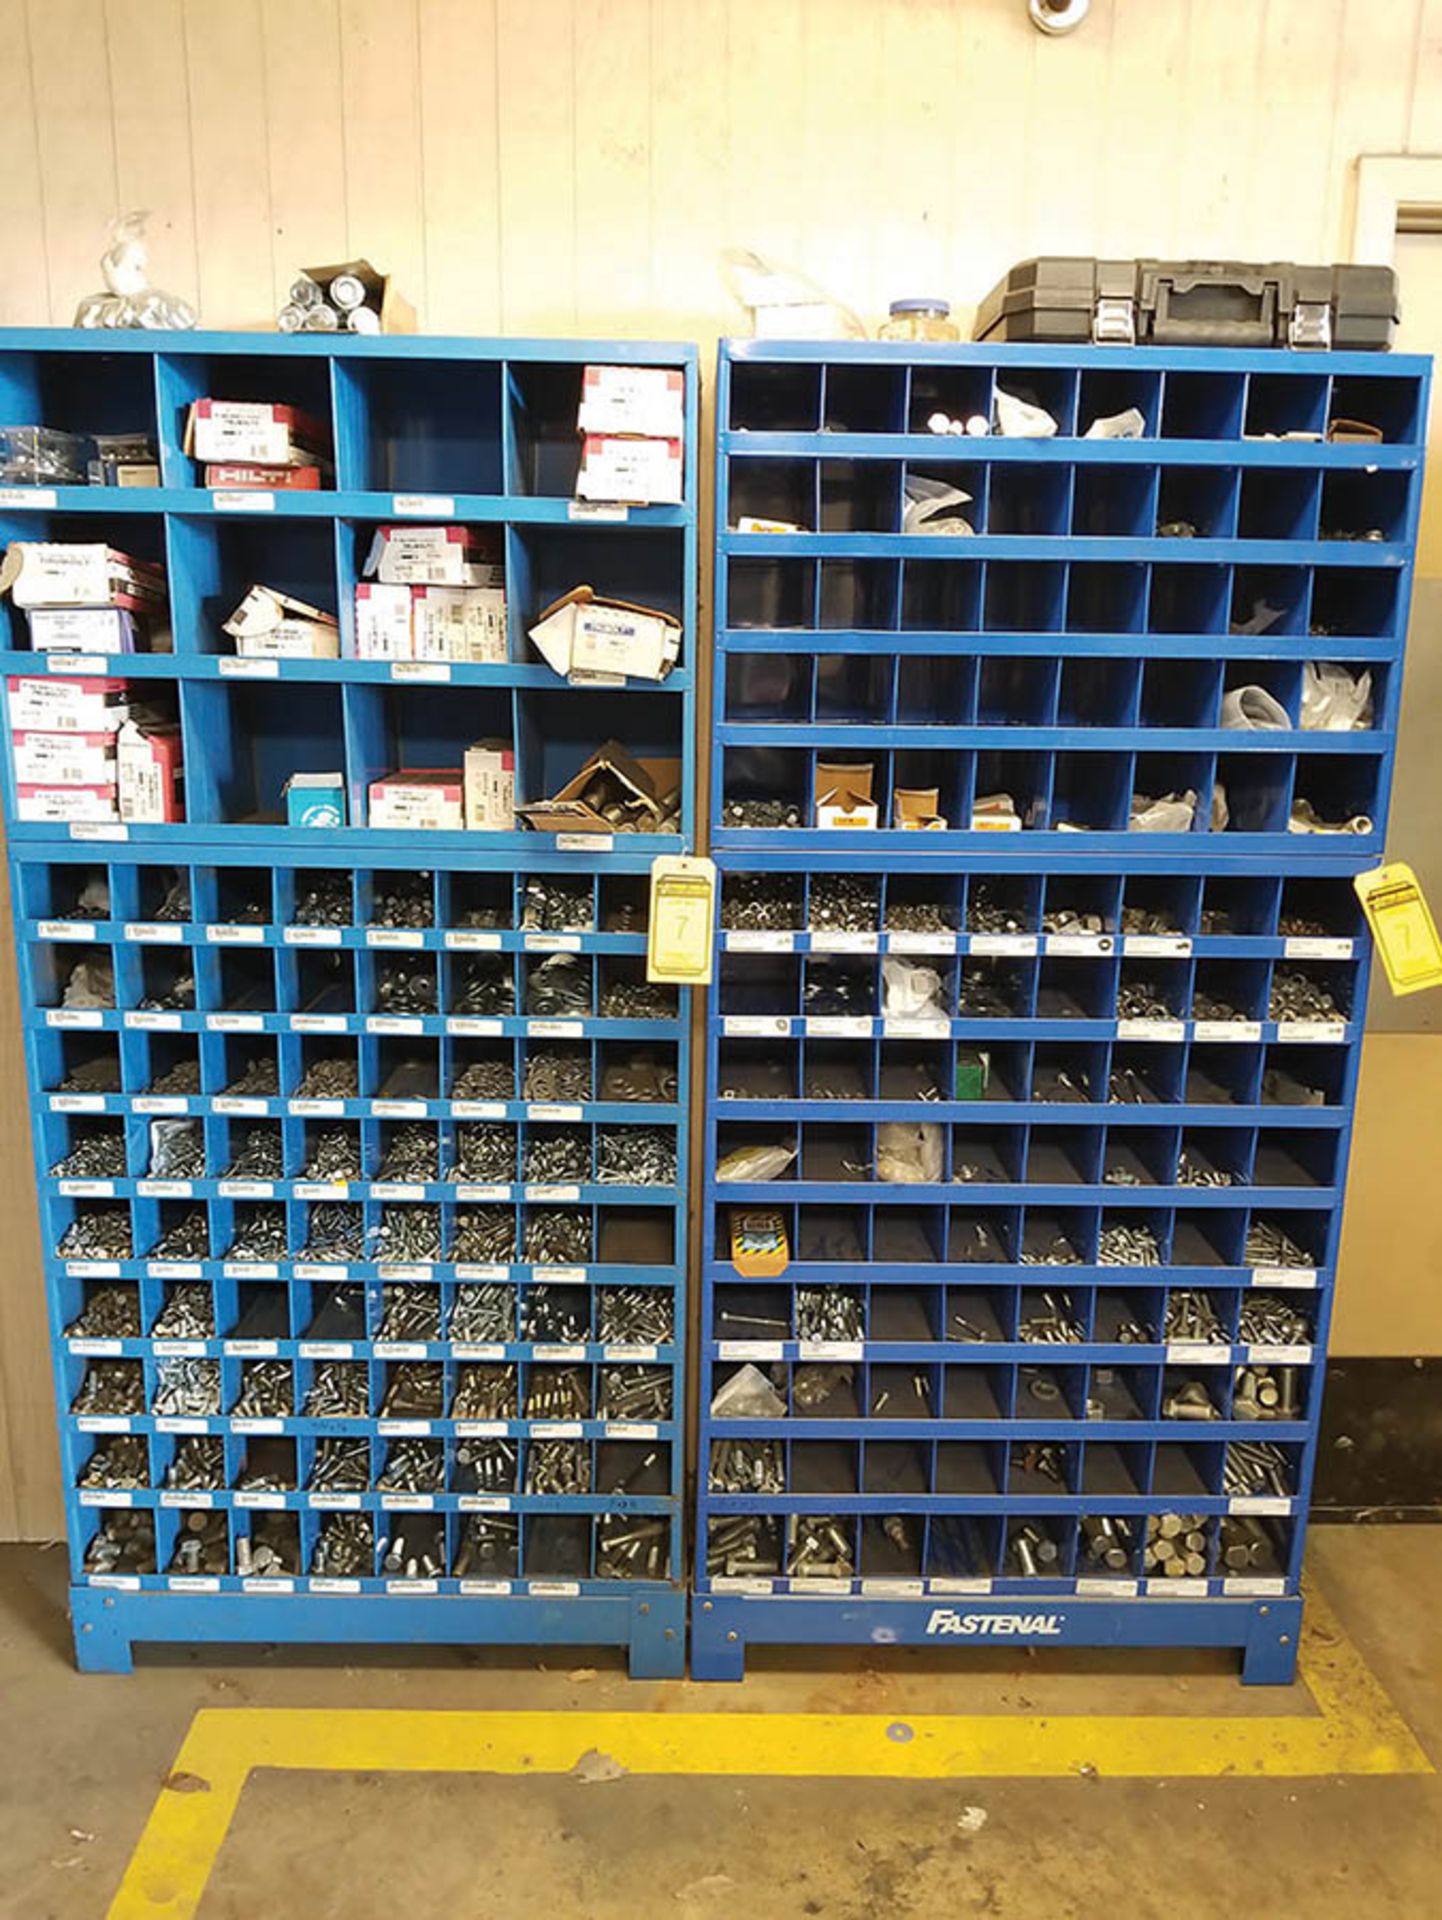 (2) FASTENAL HARDWARE BIN CABINETS WITH BOLTS, NUTS, SPRINGS, AND EDGE ANCHORS